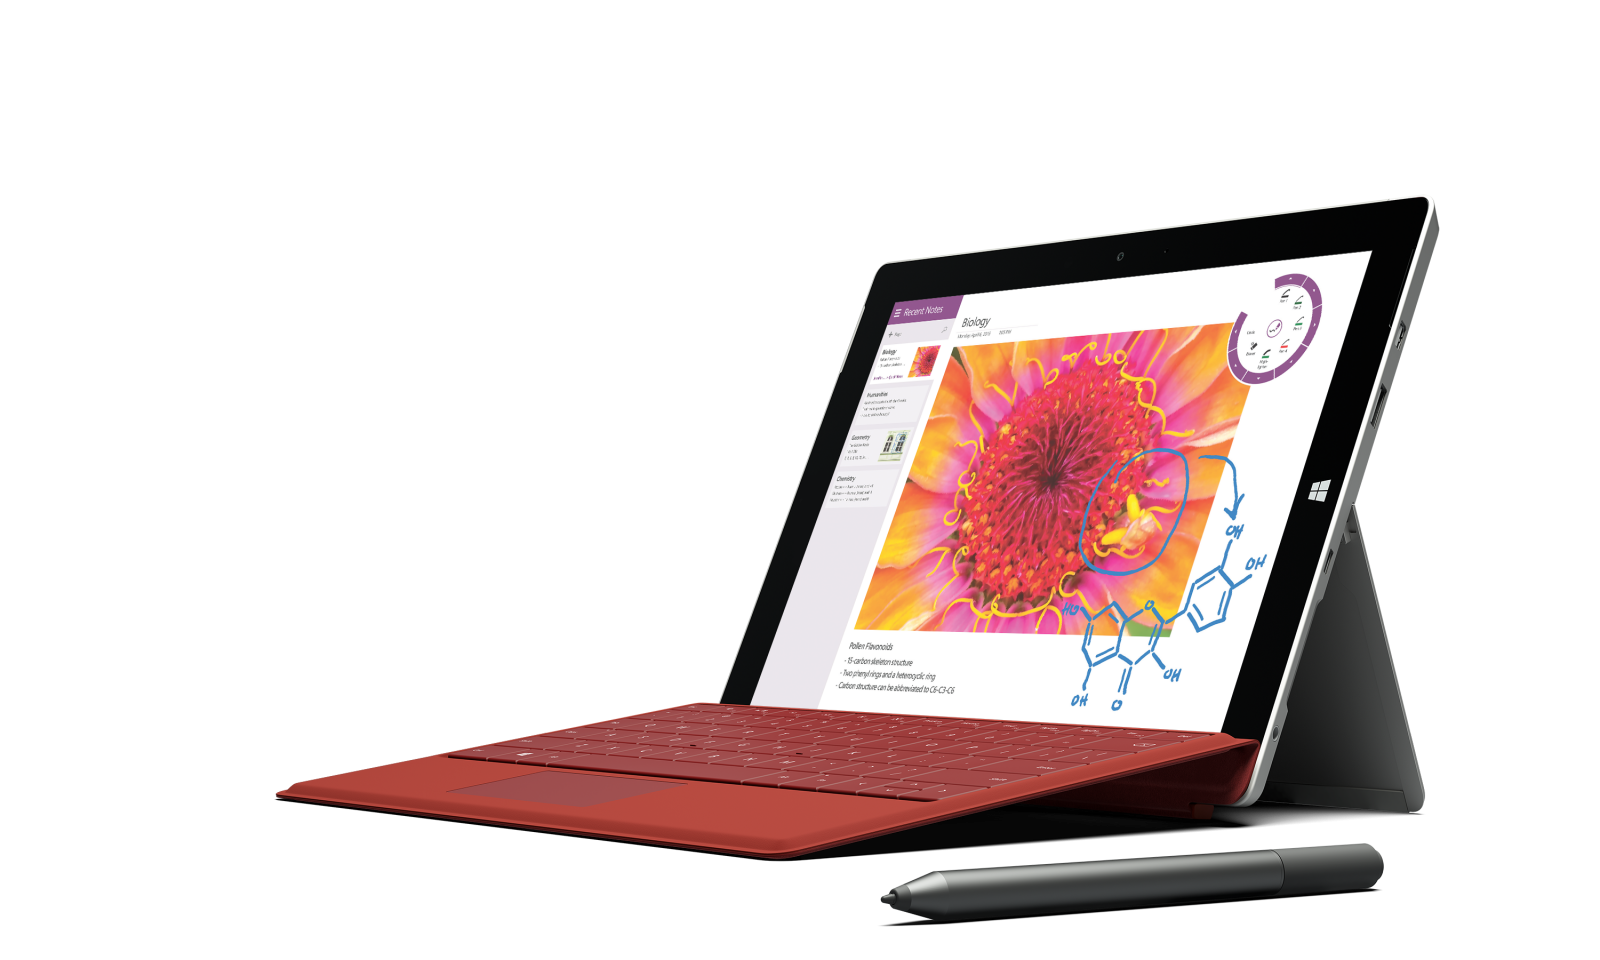 microsoft-surface-3-announced-with-windows-8-1-and-prices-starting-at-419